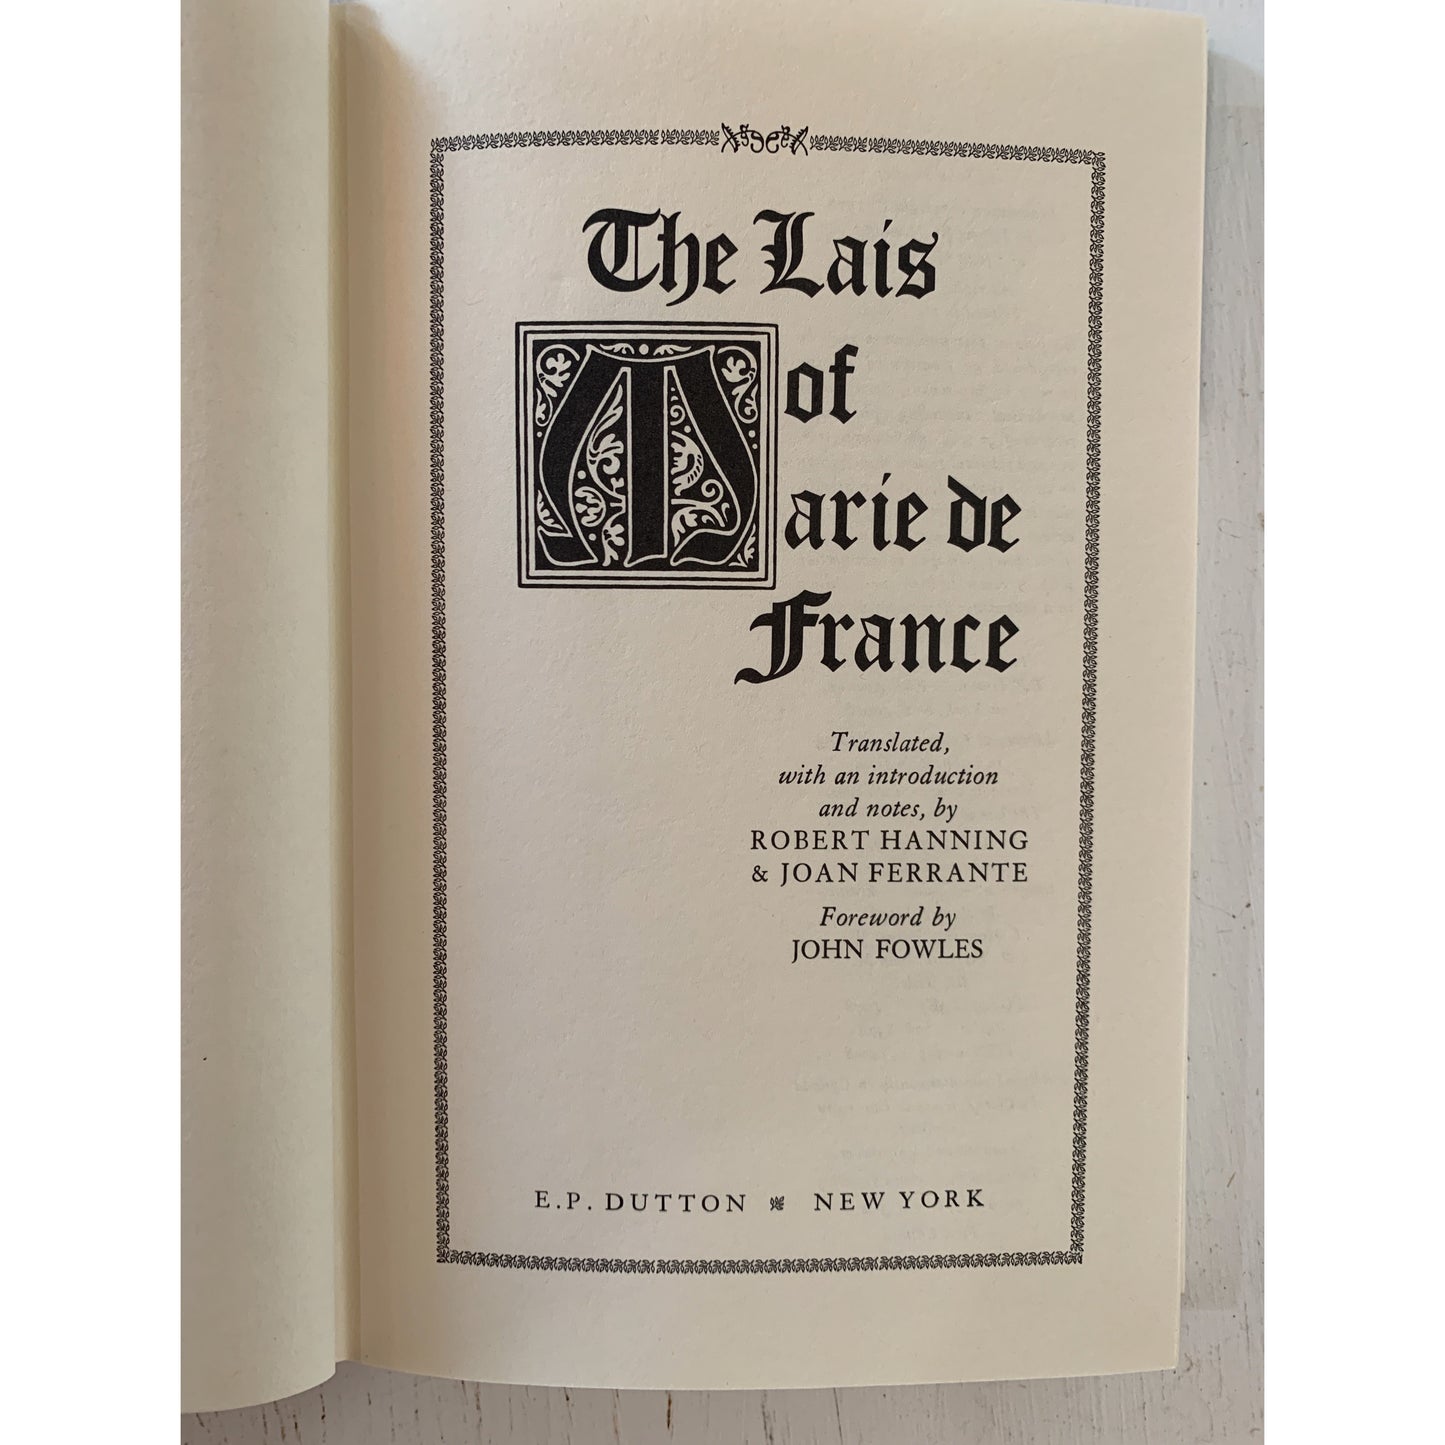 The Lais of Marie de France, Hardcover, 1978, Poetry Book